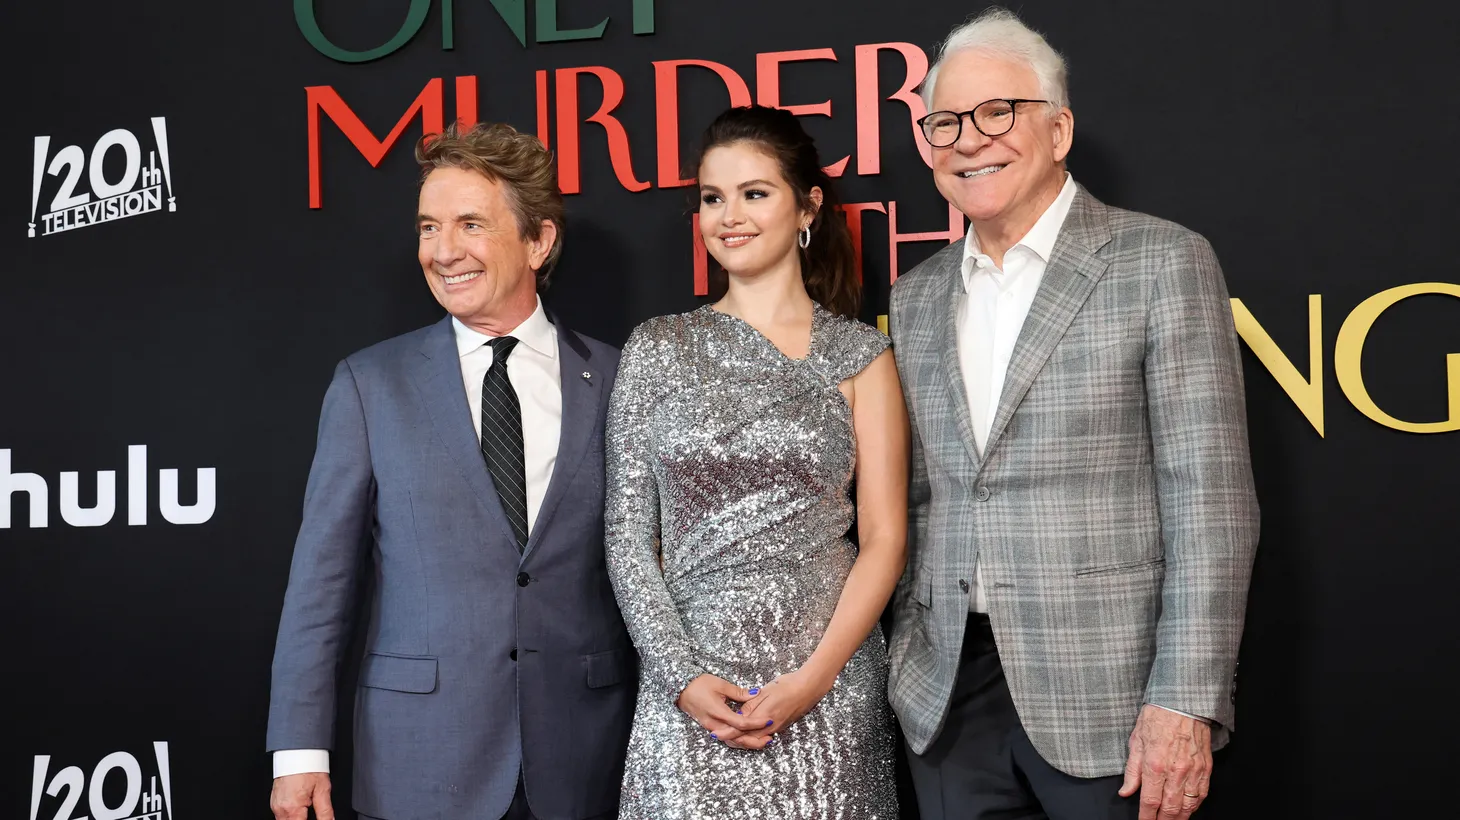 “That's a good idea: three older guys who live in a building and solve murders because they don't have anything else to do,’” says Steve Martin, whose idea morphed into adding Selena Gomez as the third cast member. Martin Short (left), Selena Gomez and Steve Martin attend a premiere for season 2 of "Only Murders in the Building," in Los Angeles, California, on June 27, 2022.